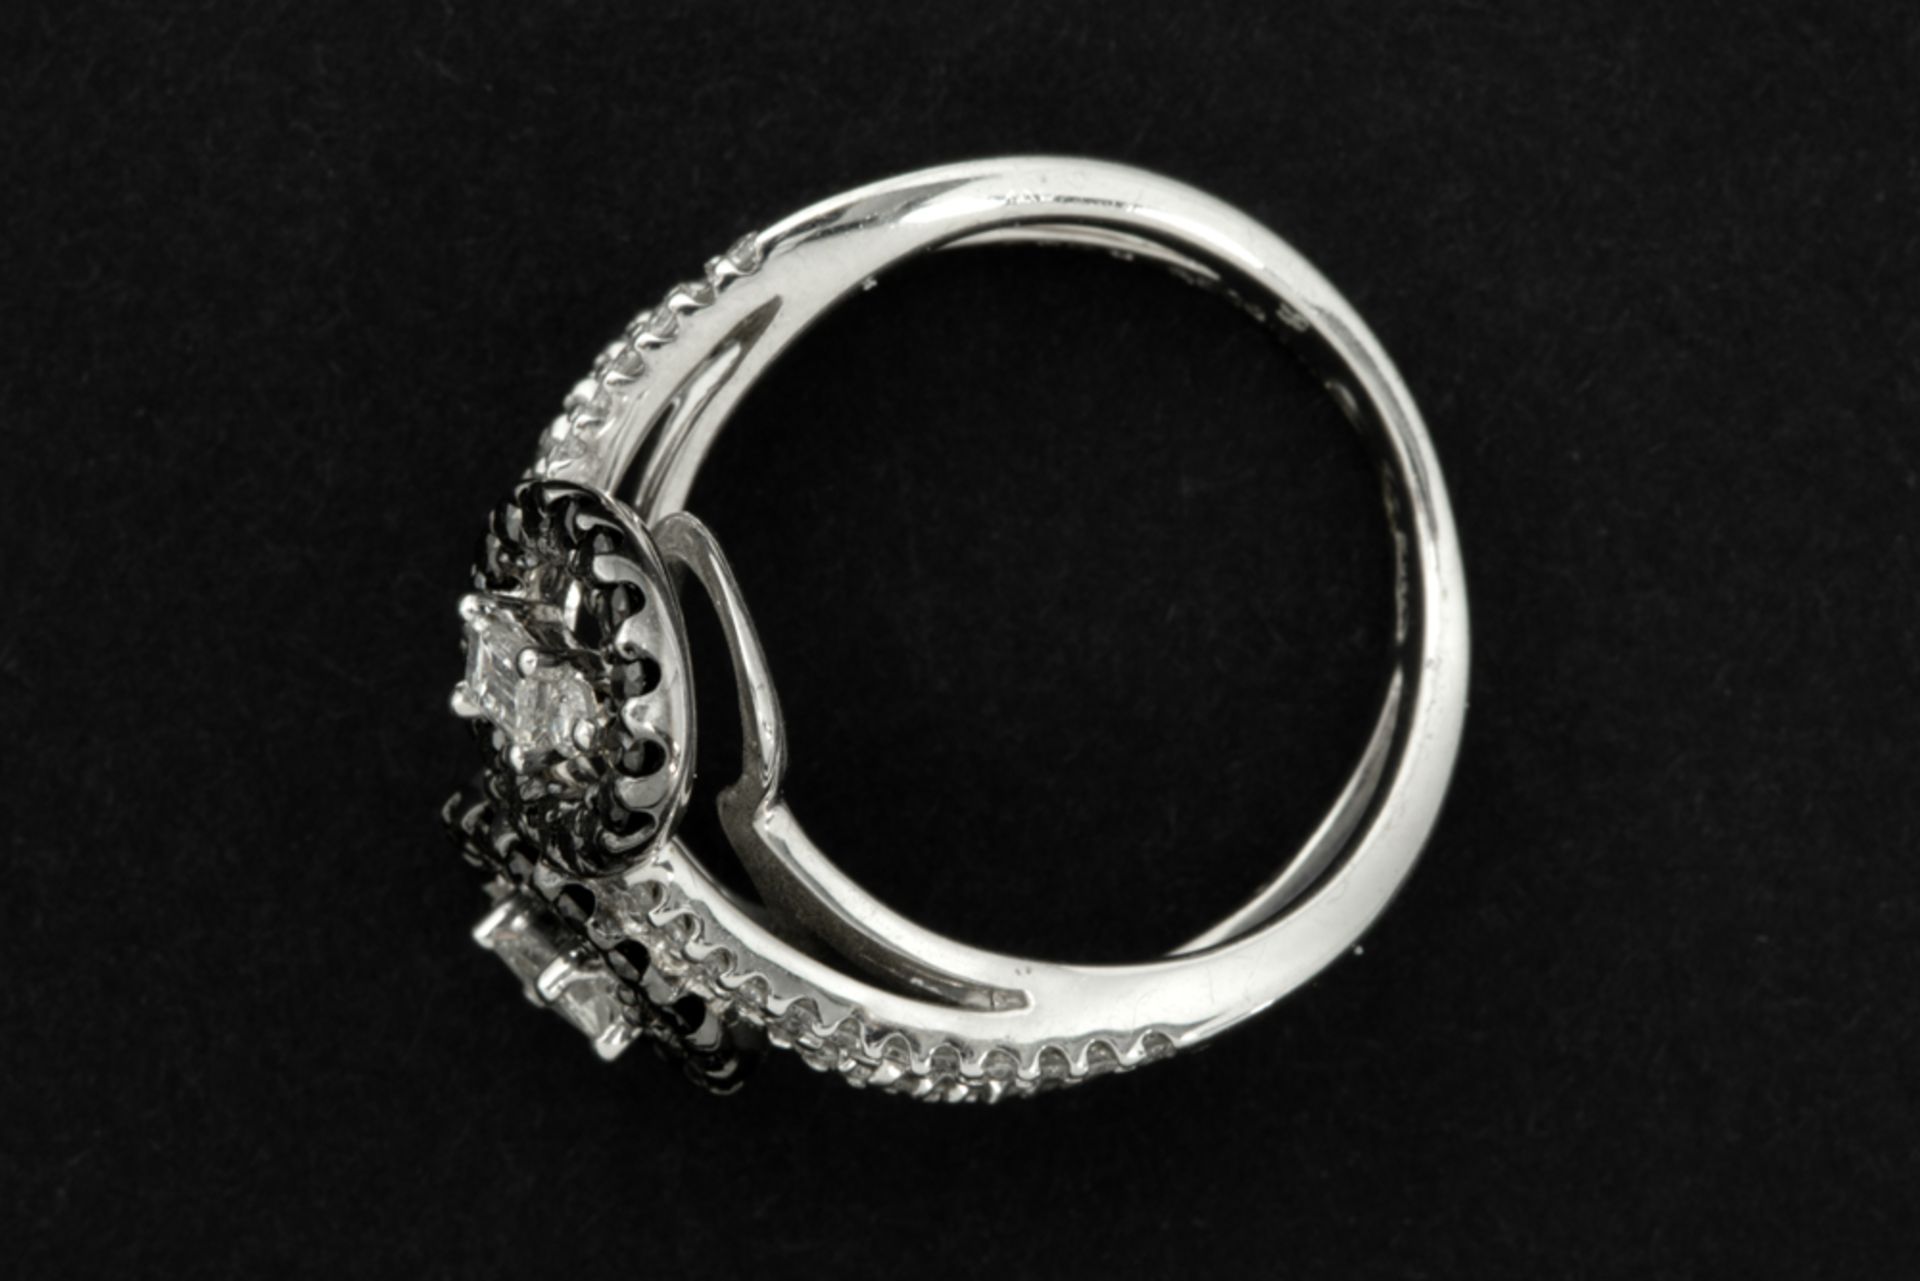 modern ring in white gold (18 carat) with ca 1 carat of white and black quality brilliant cut - Image 2 of 2